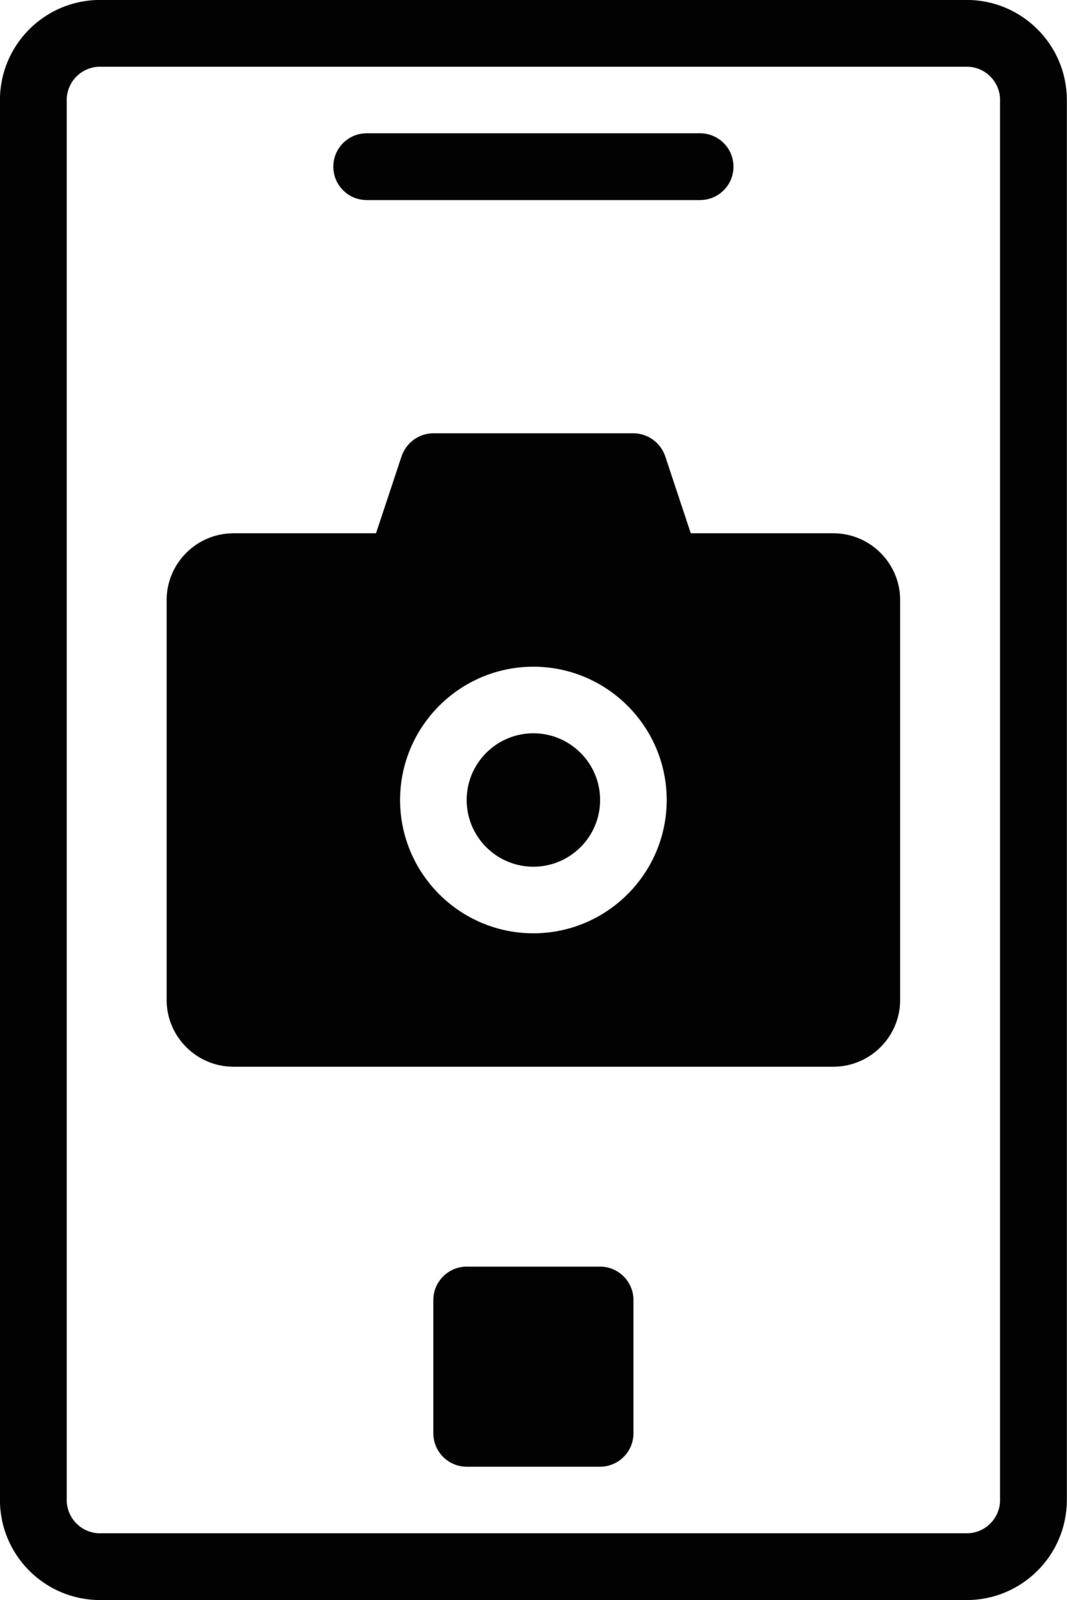 camera Vector illustration on a transparent background. Premium quality symmbols. Glyphs vector icons for concept and graphic design.